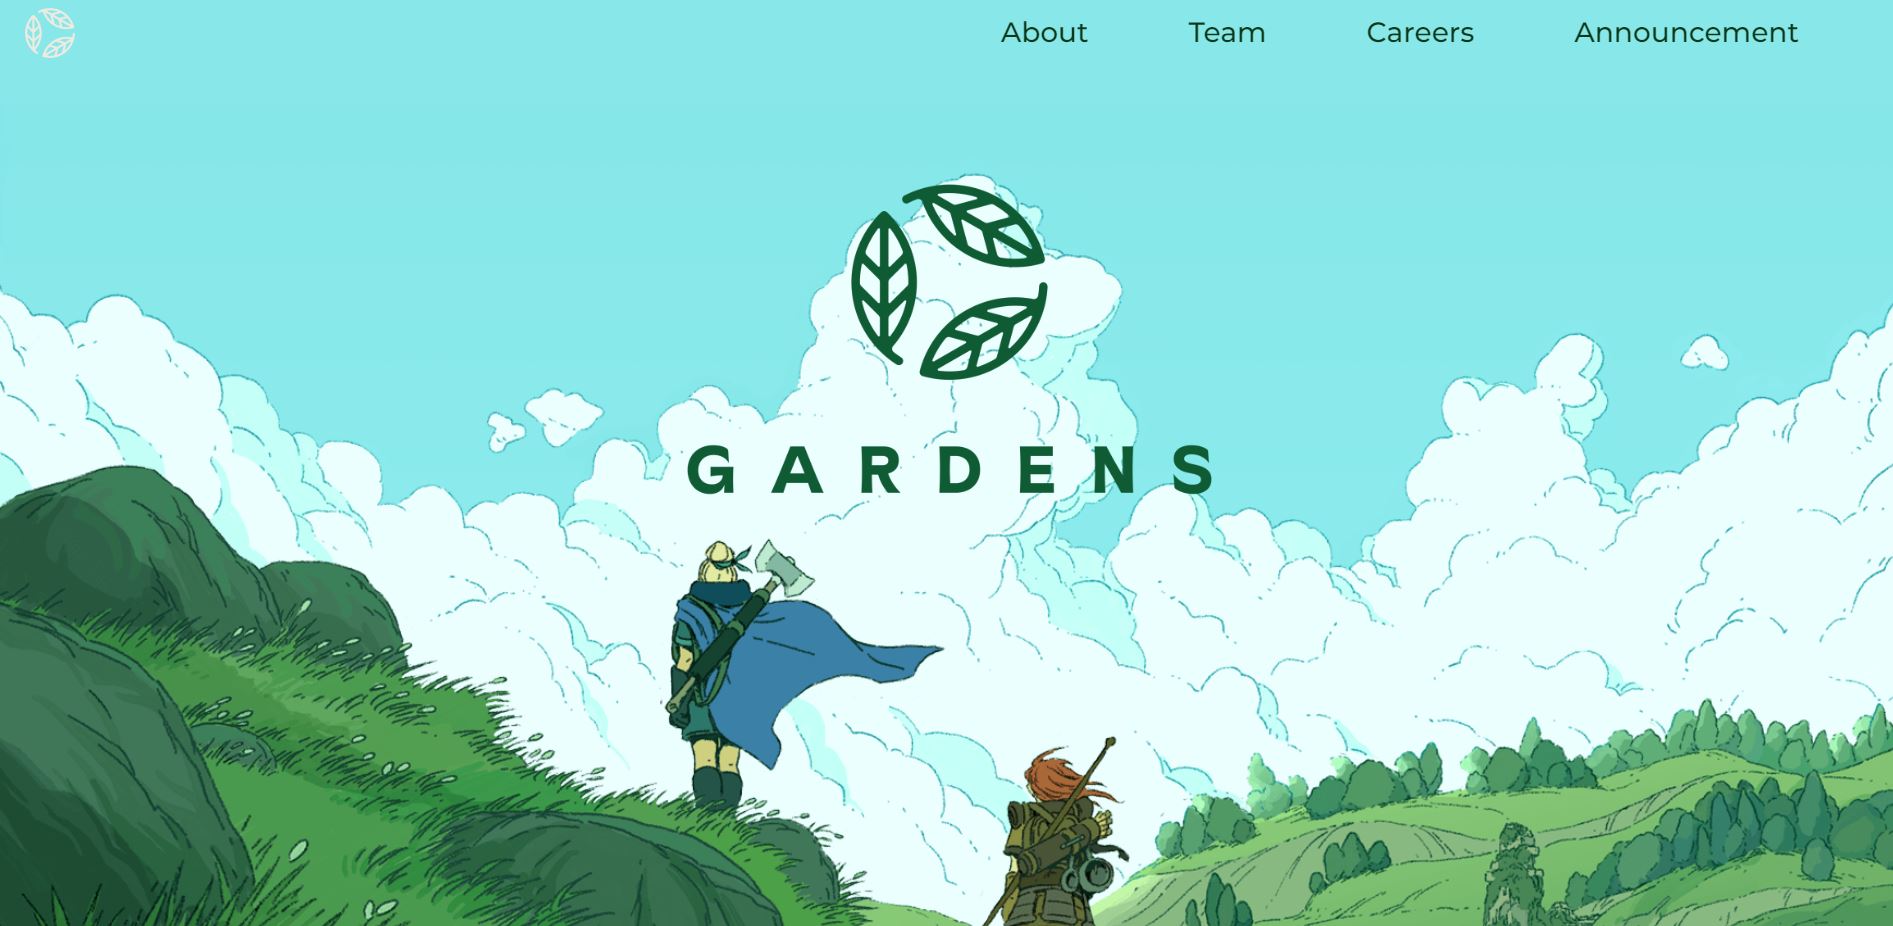 Gardens: LA-based startup transforming computer games, led by founder Lexie Dostal, raised $31.3M Series A